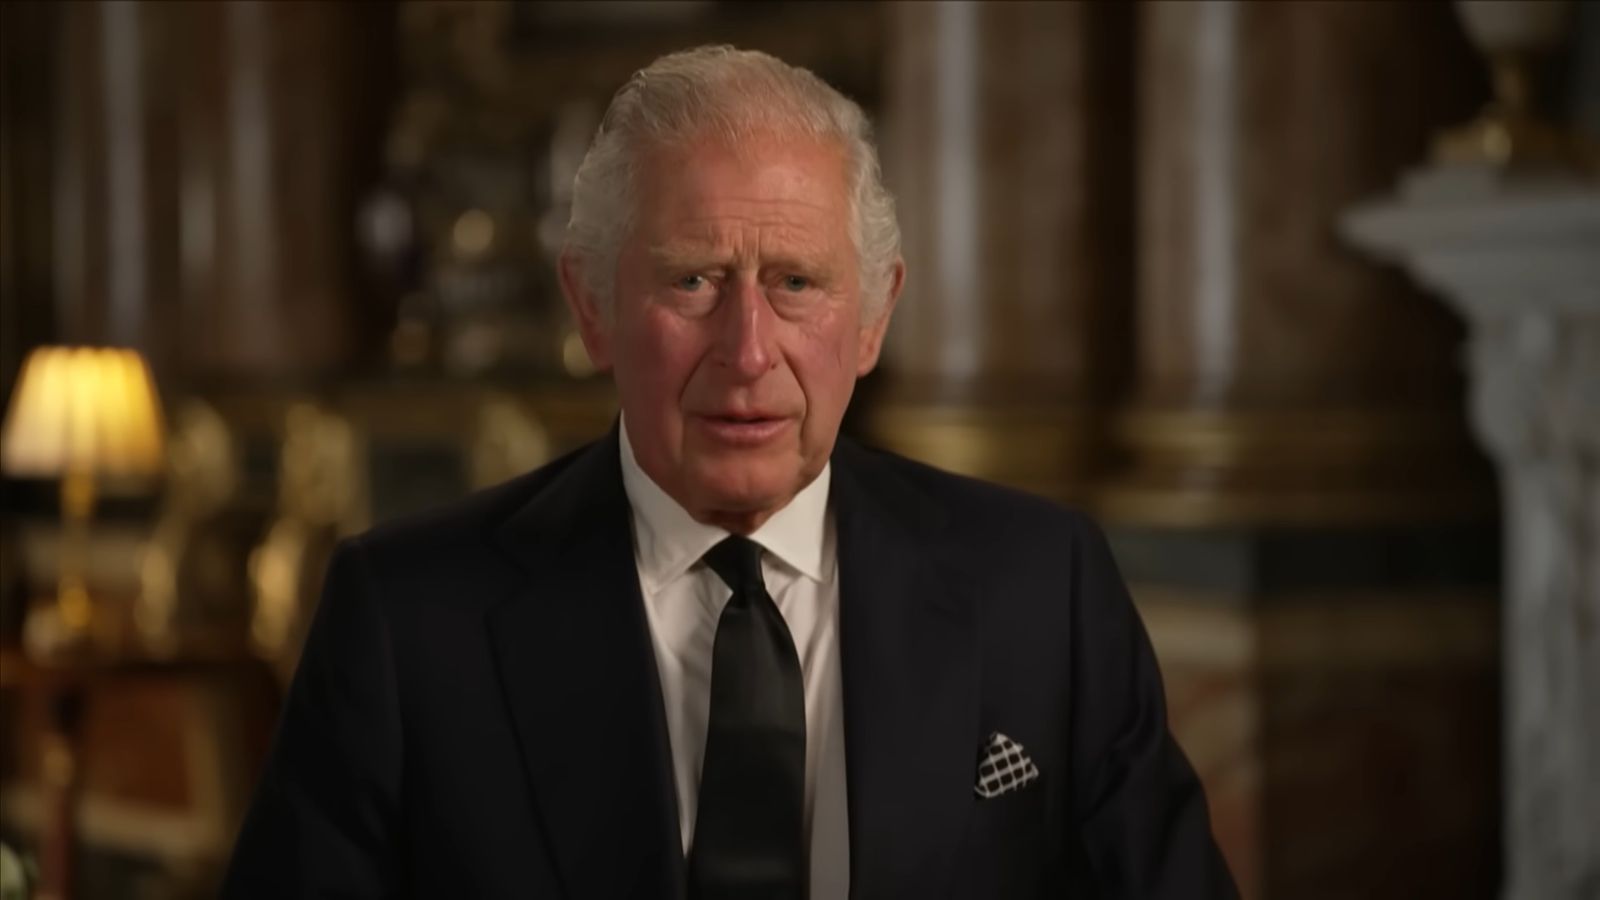 king-charles-had-an-unspoken-agreement-with-queen-elizabeth-regarding-camilla-monarchs-wife-reportedly-became-queen-consort-after-prince-andrew-settled-his-lawsuit